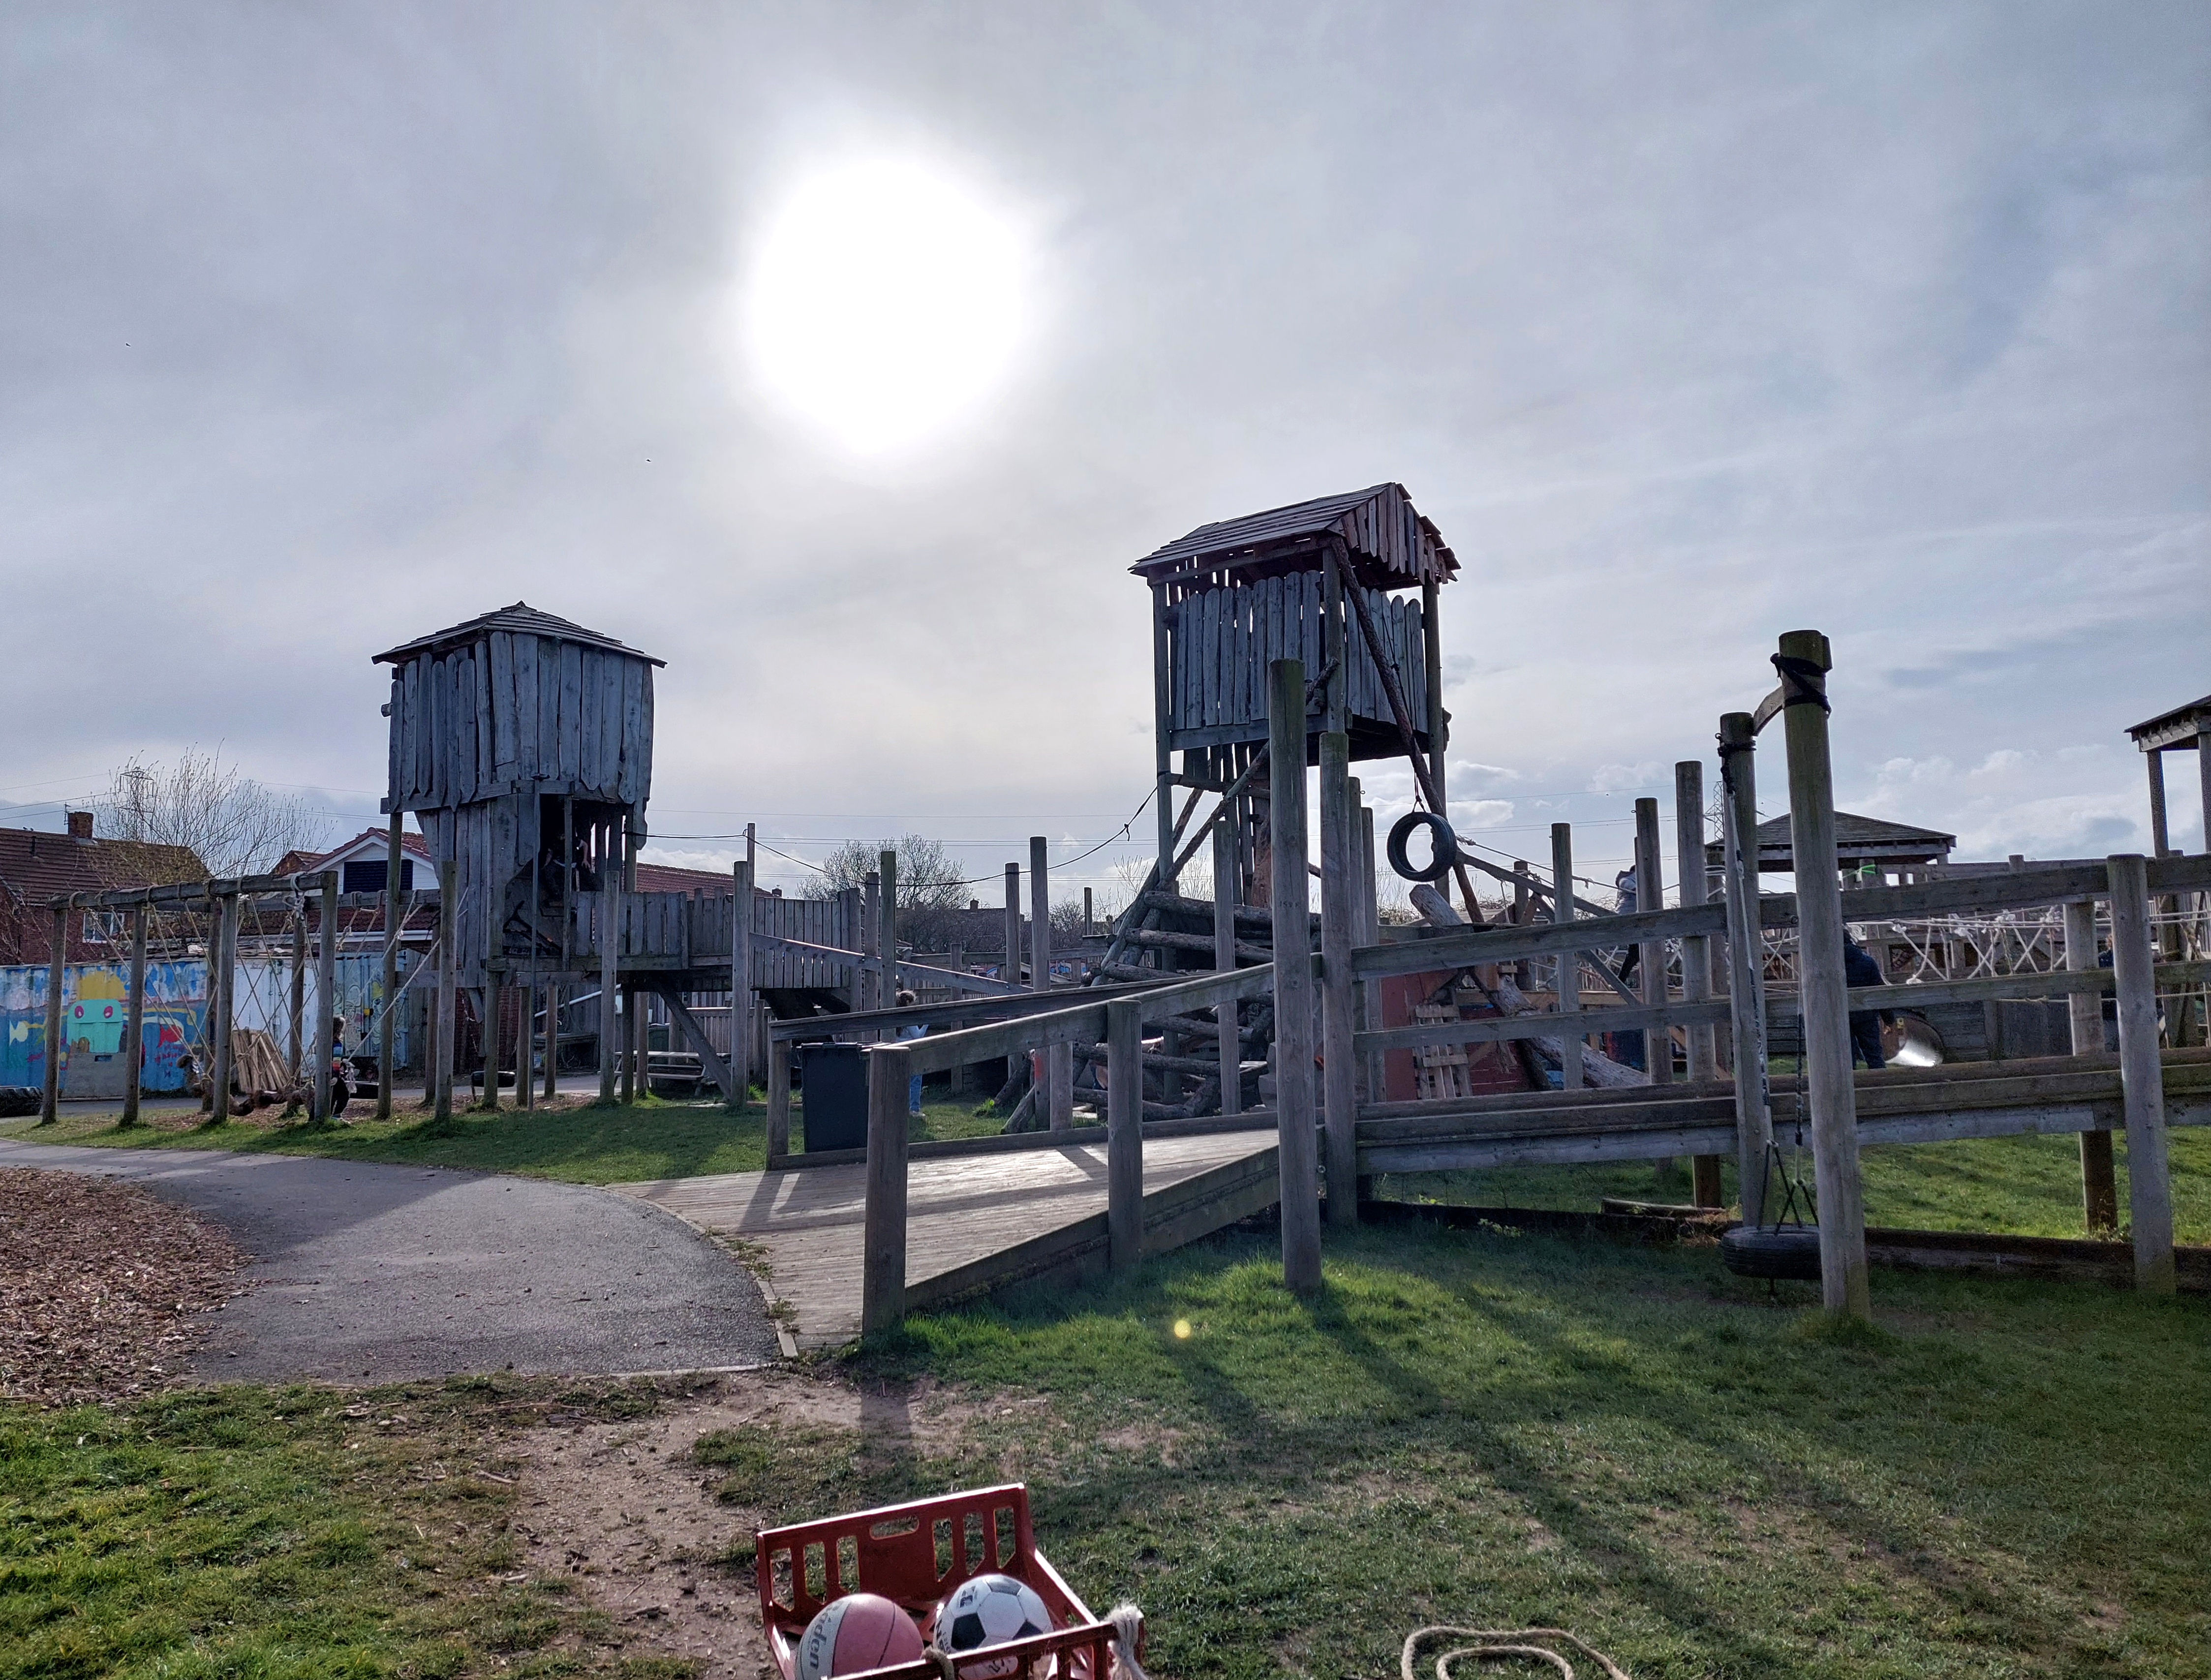 10 Free Days Out Near a Metro Station  - Shiremoor Adventure Playground